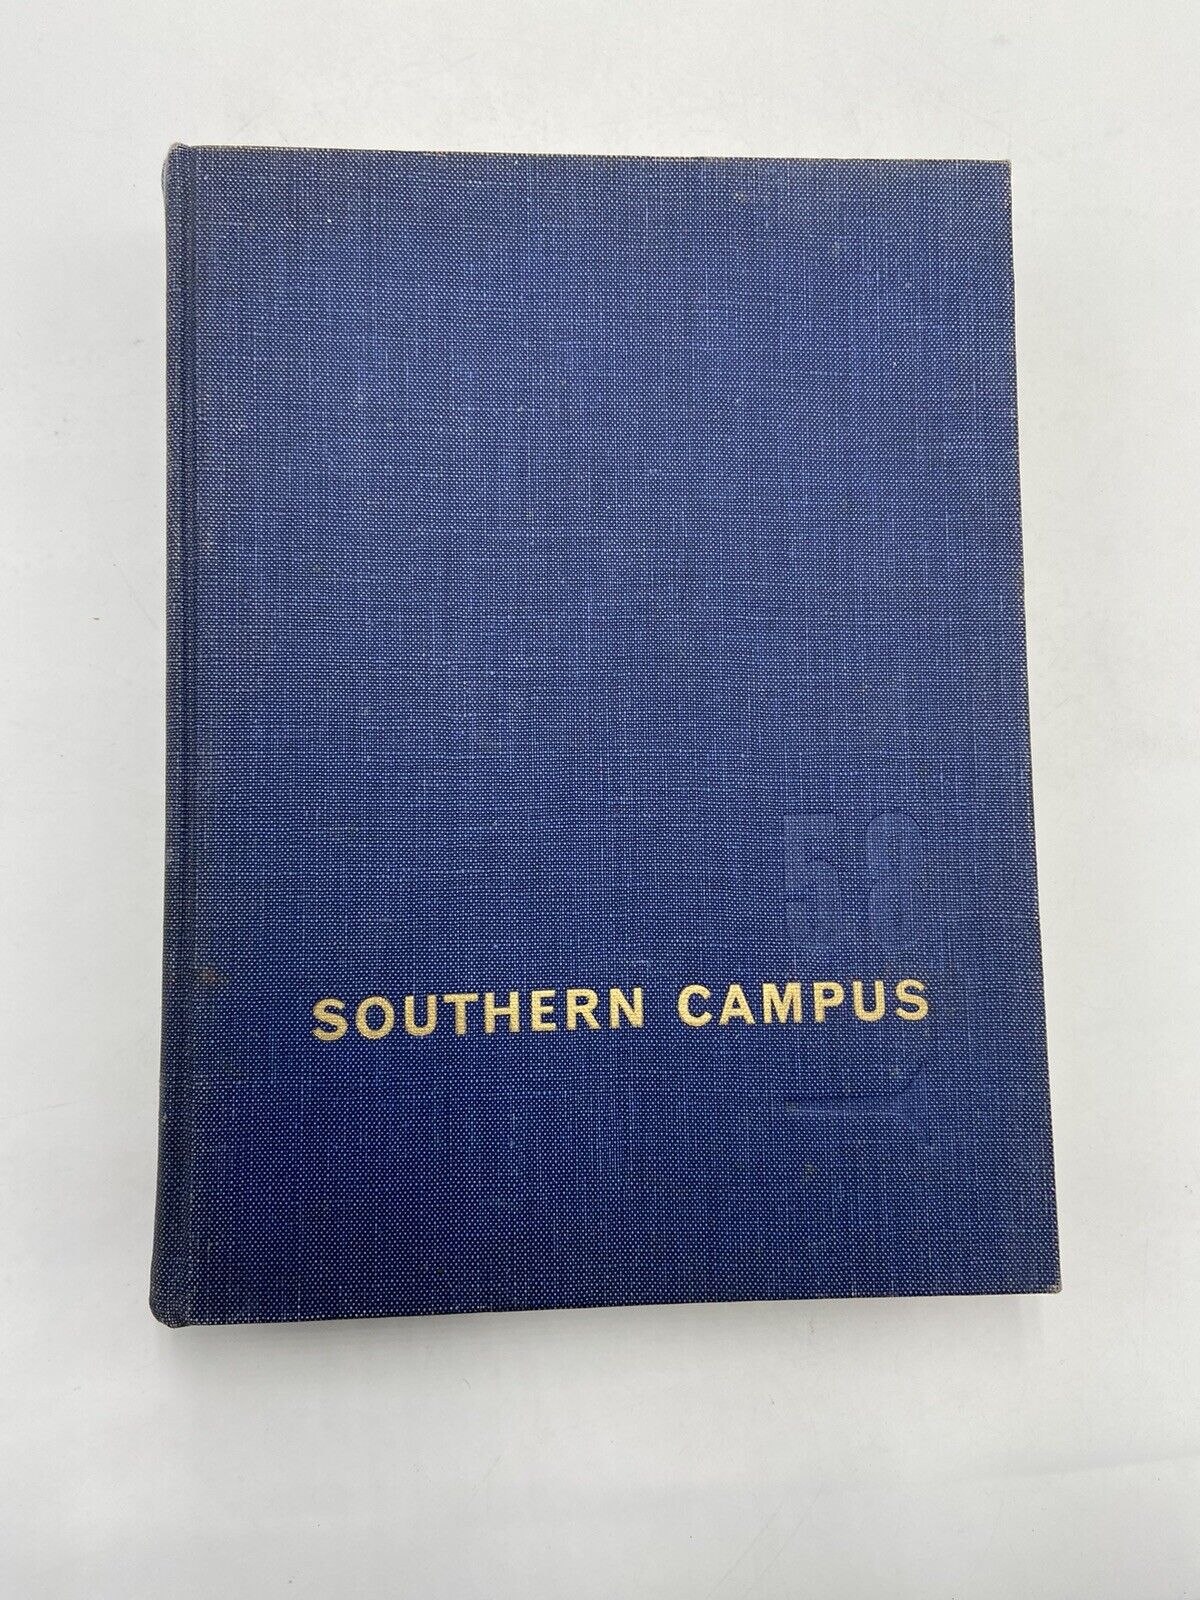 UCLA SOUTHERN CAMPUS 1958 YEARBOOK w/ HoF Bruins Basketball Coach John Wooden